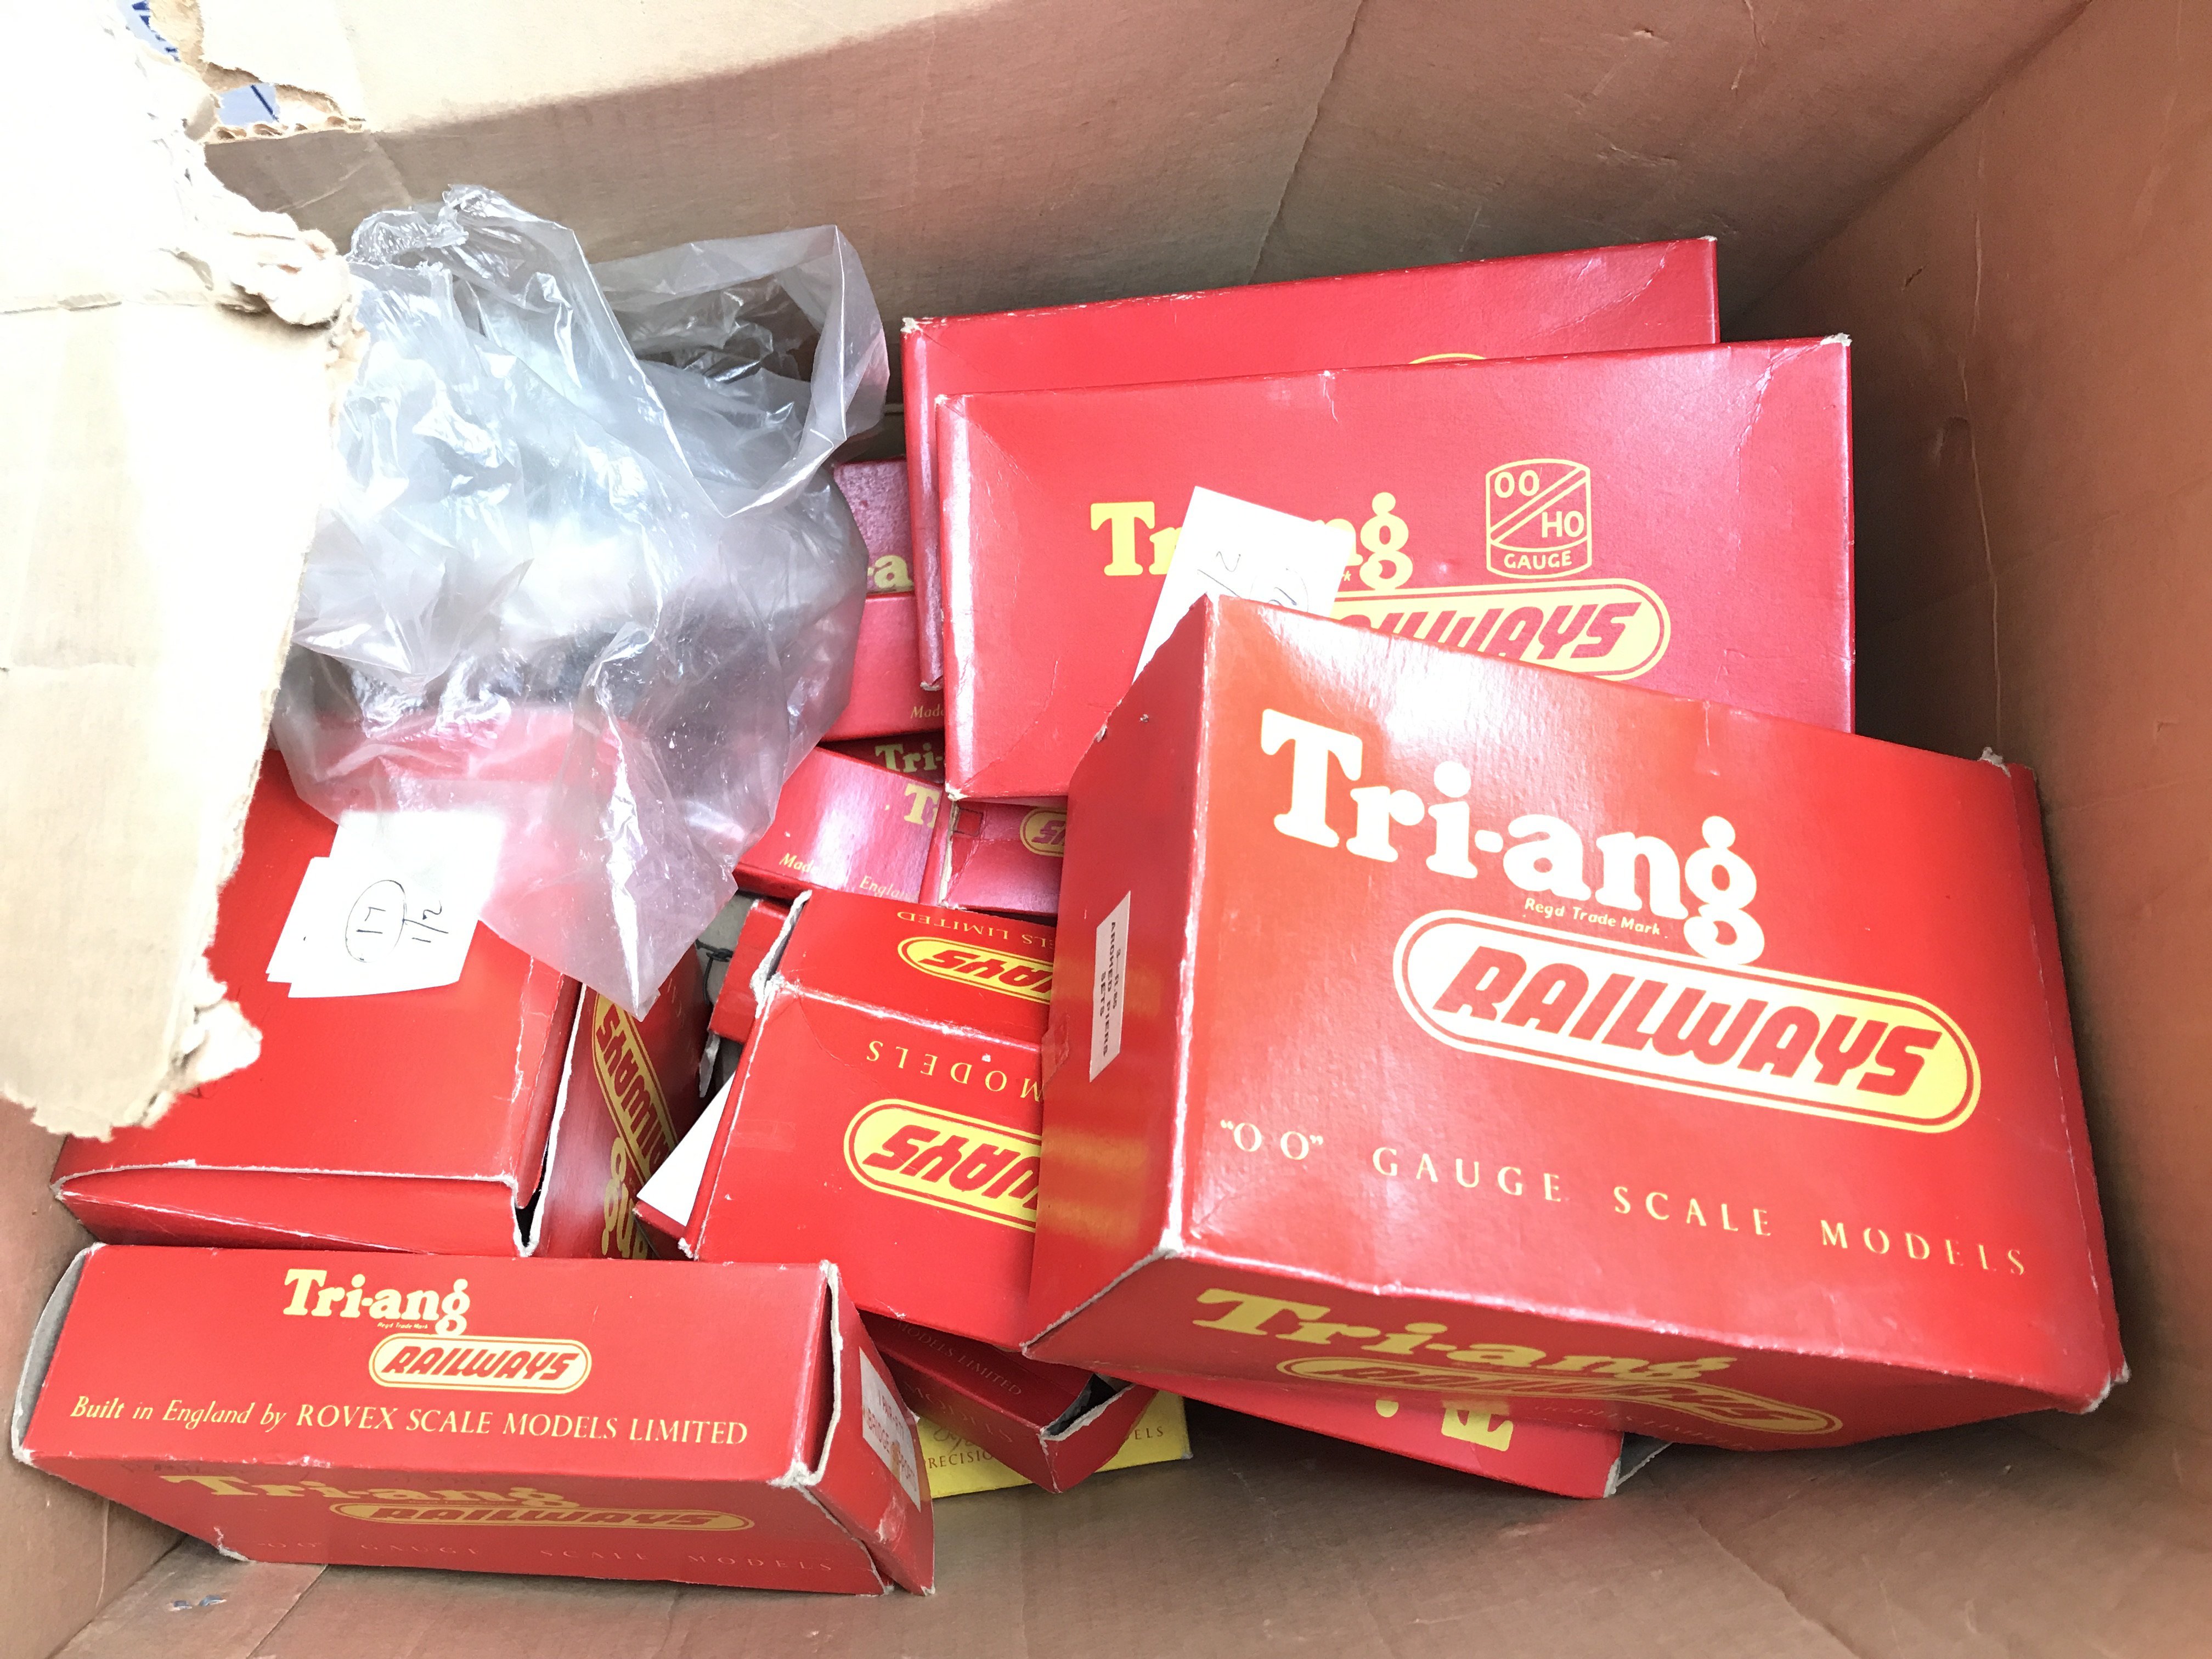 A box containing a collection of Trai-ang '00' gau